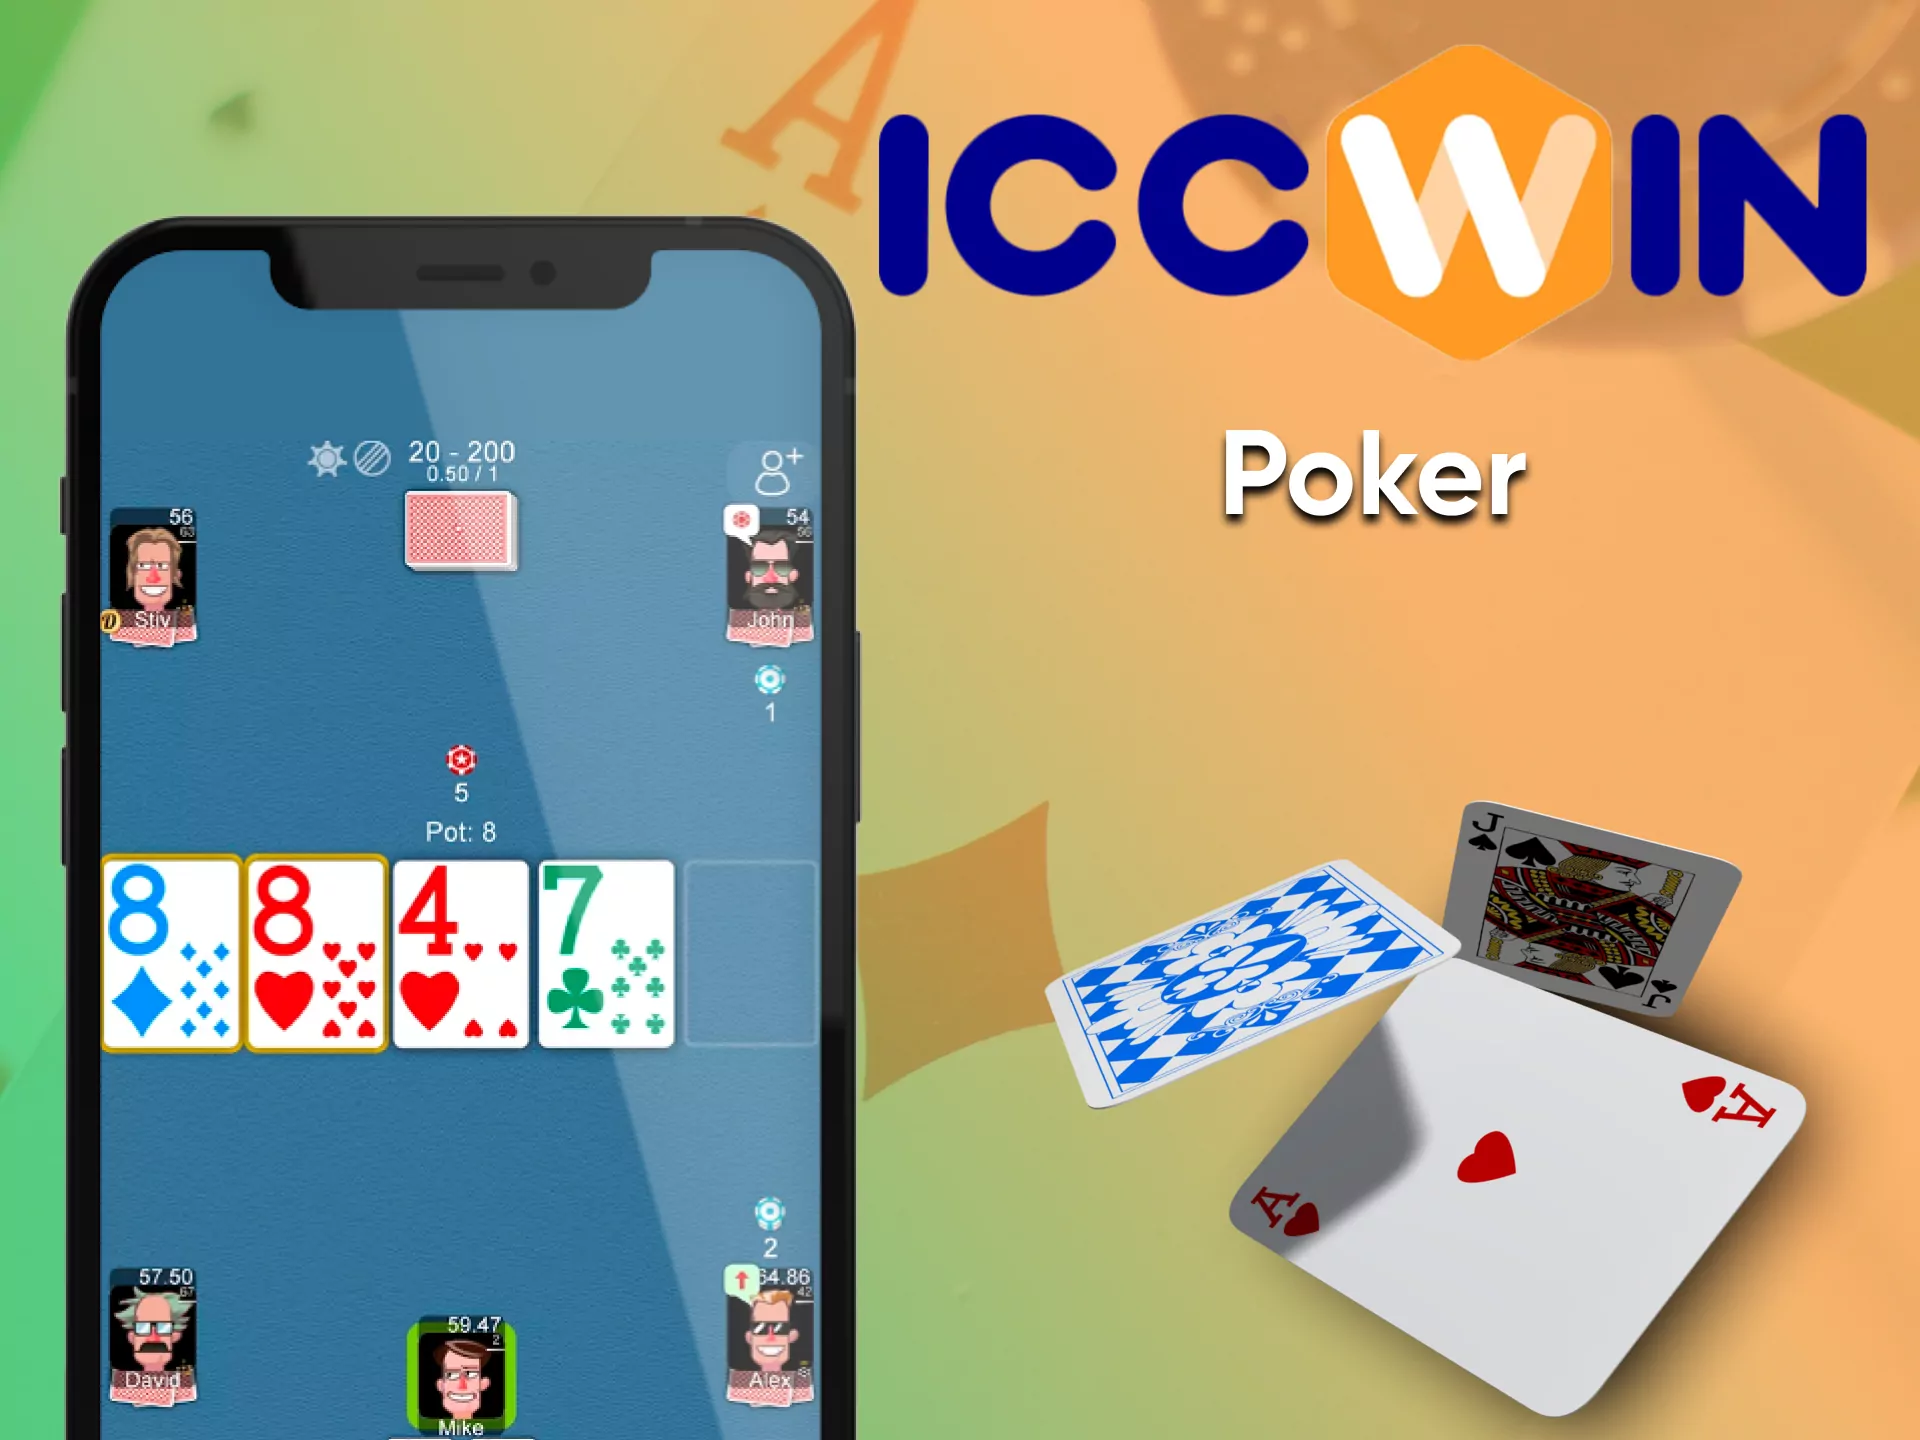 Choose the section with Poker from ICCWin.